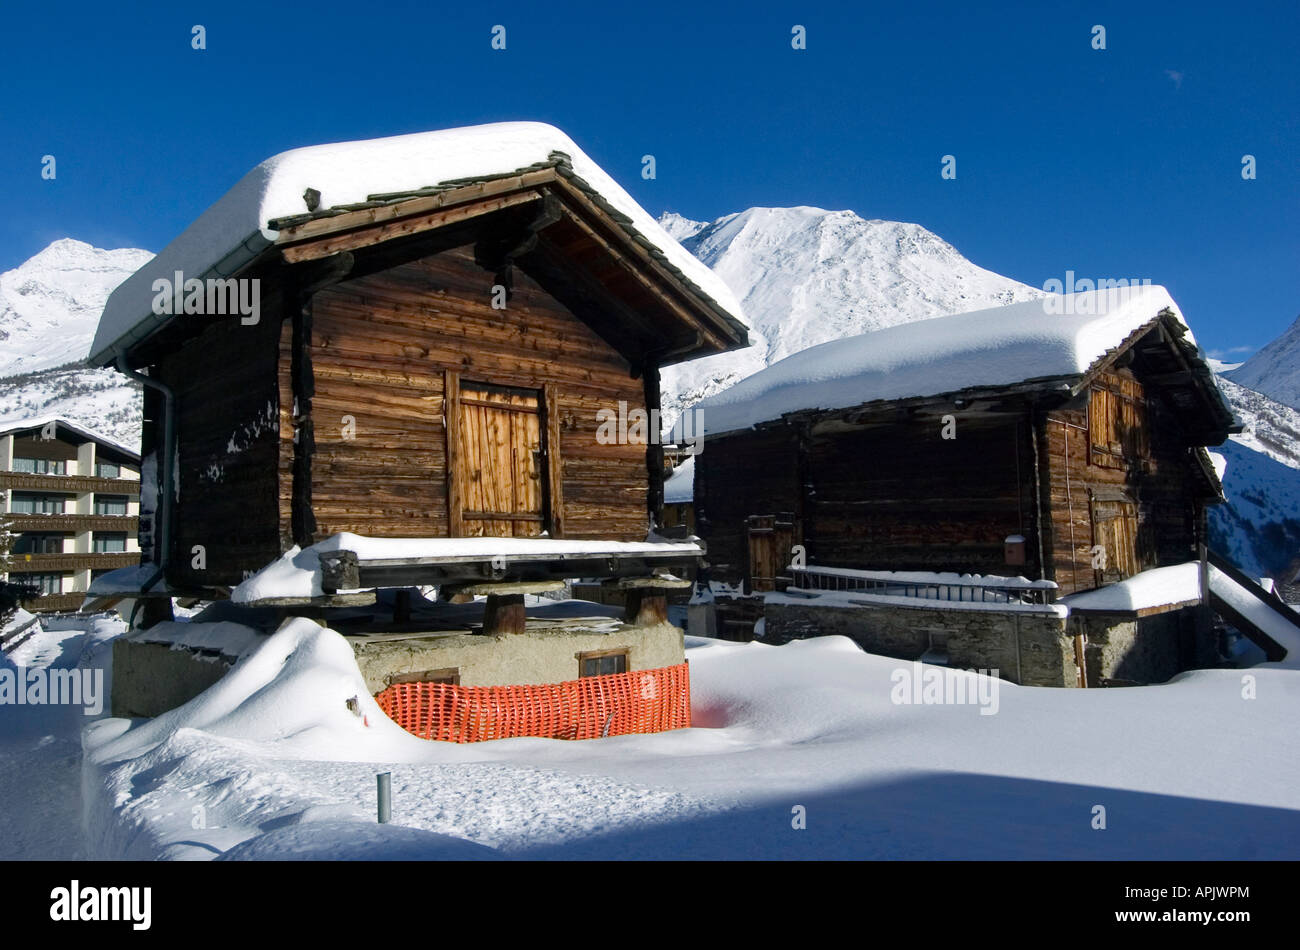 Old traditional wooden barns in the ski resort of Saas Fee in Switzerland Stock Photo